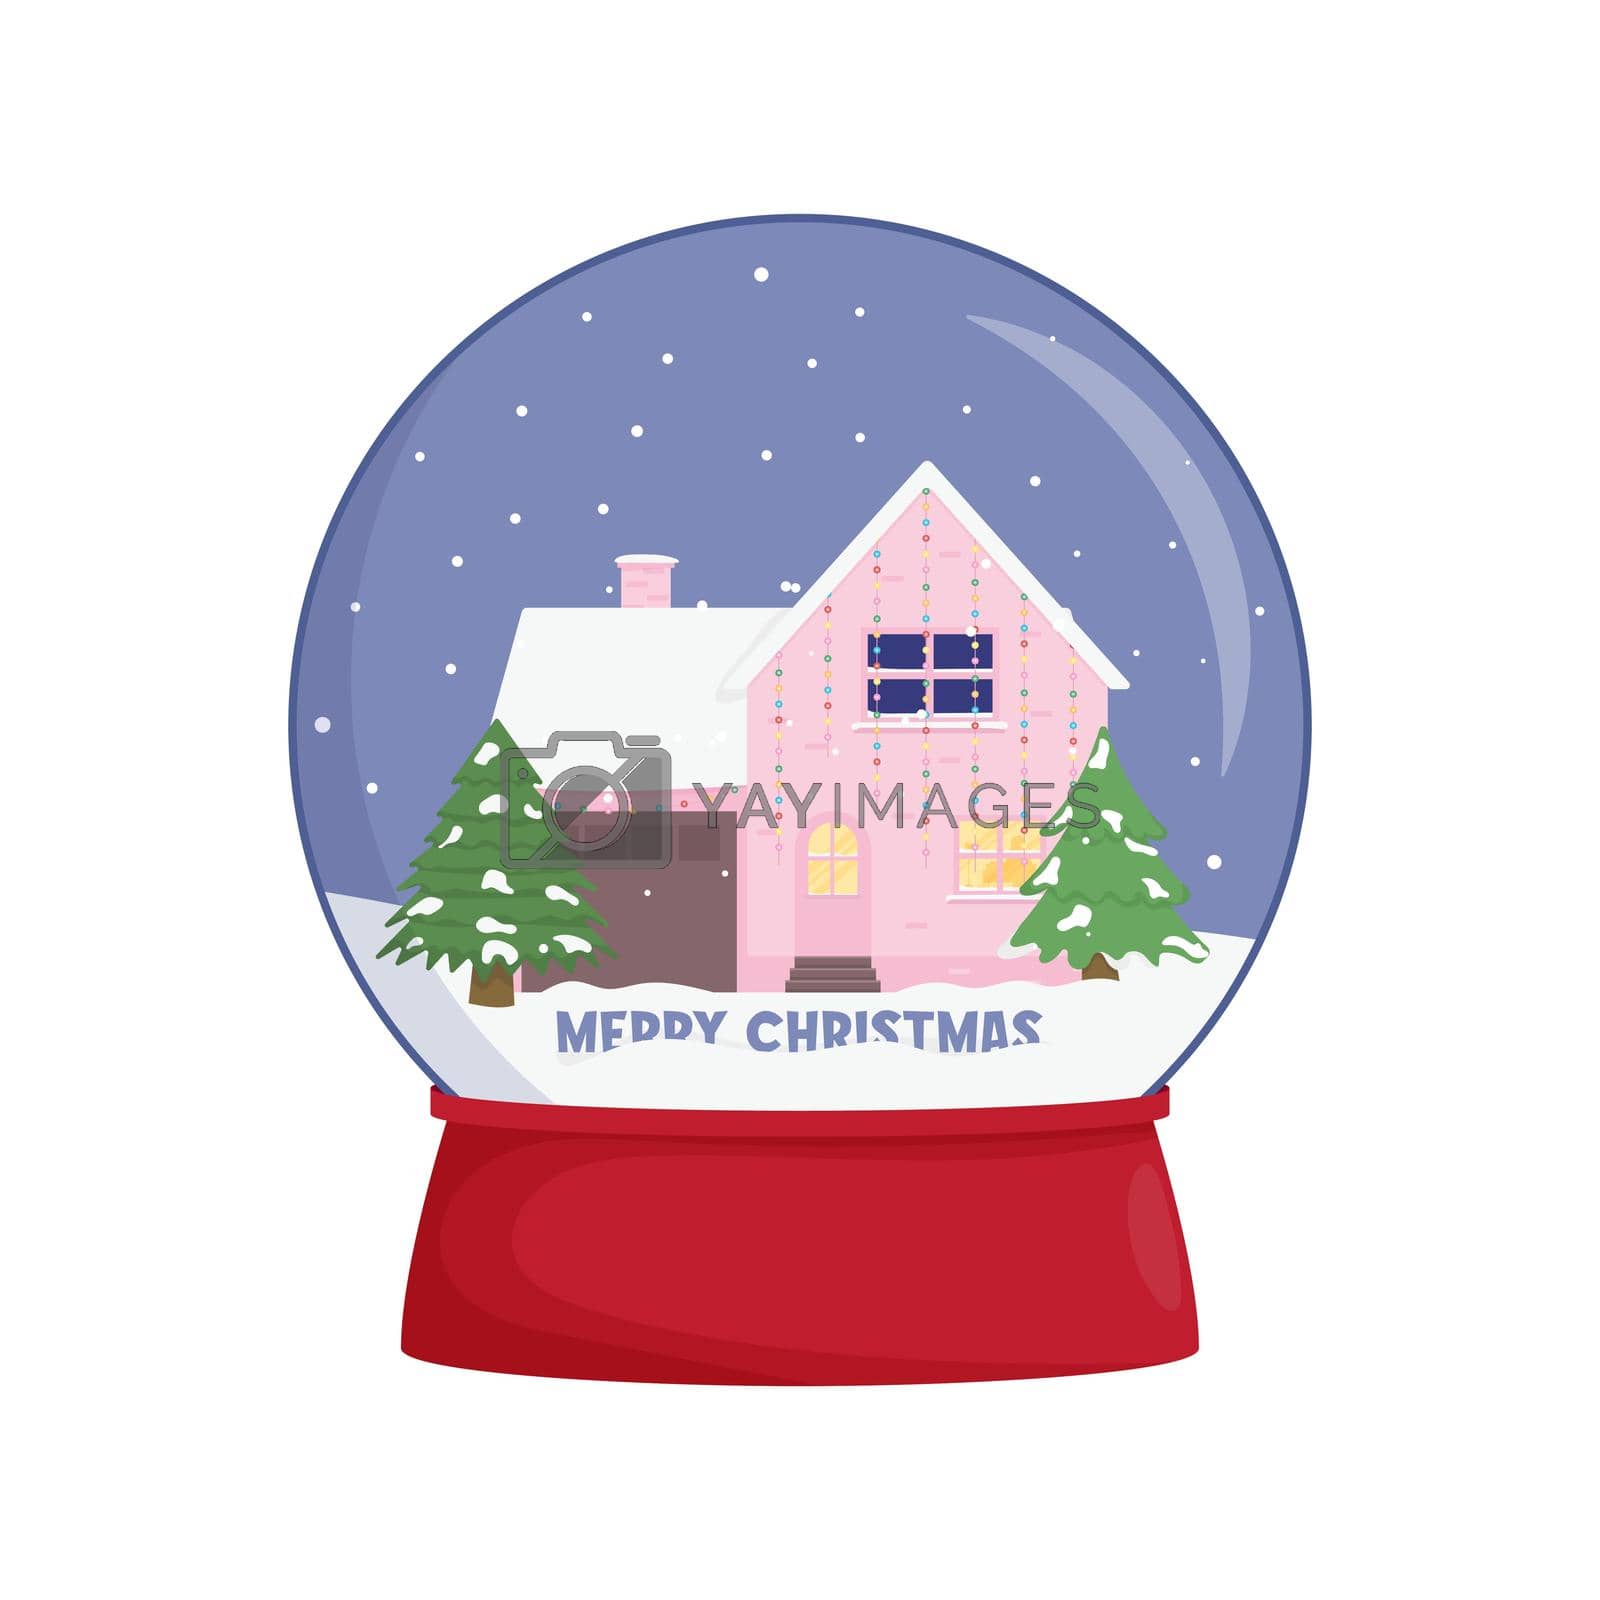 Royalty free image of Snow globe with a town. Winter wonderland scenes in a snow globe. by anna_orlova